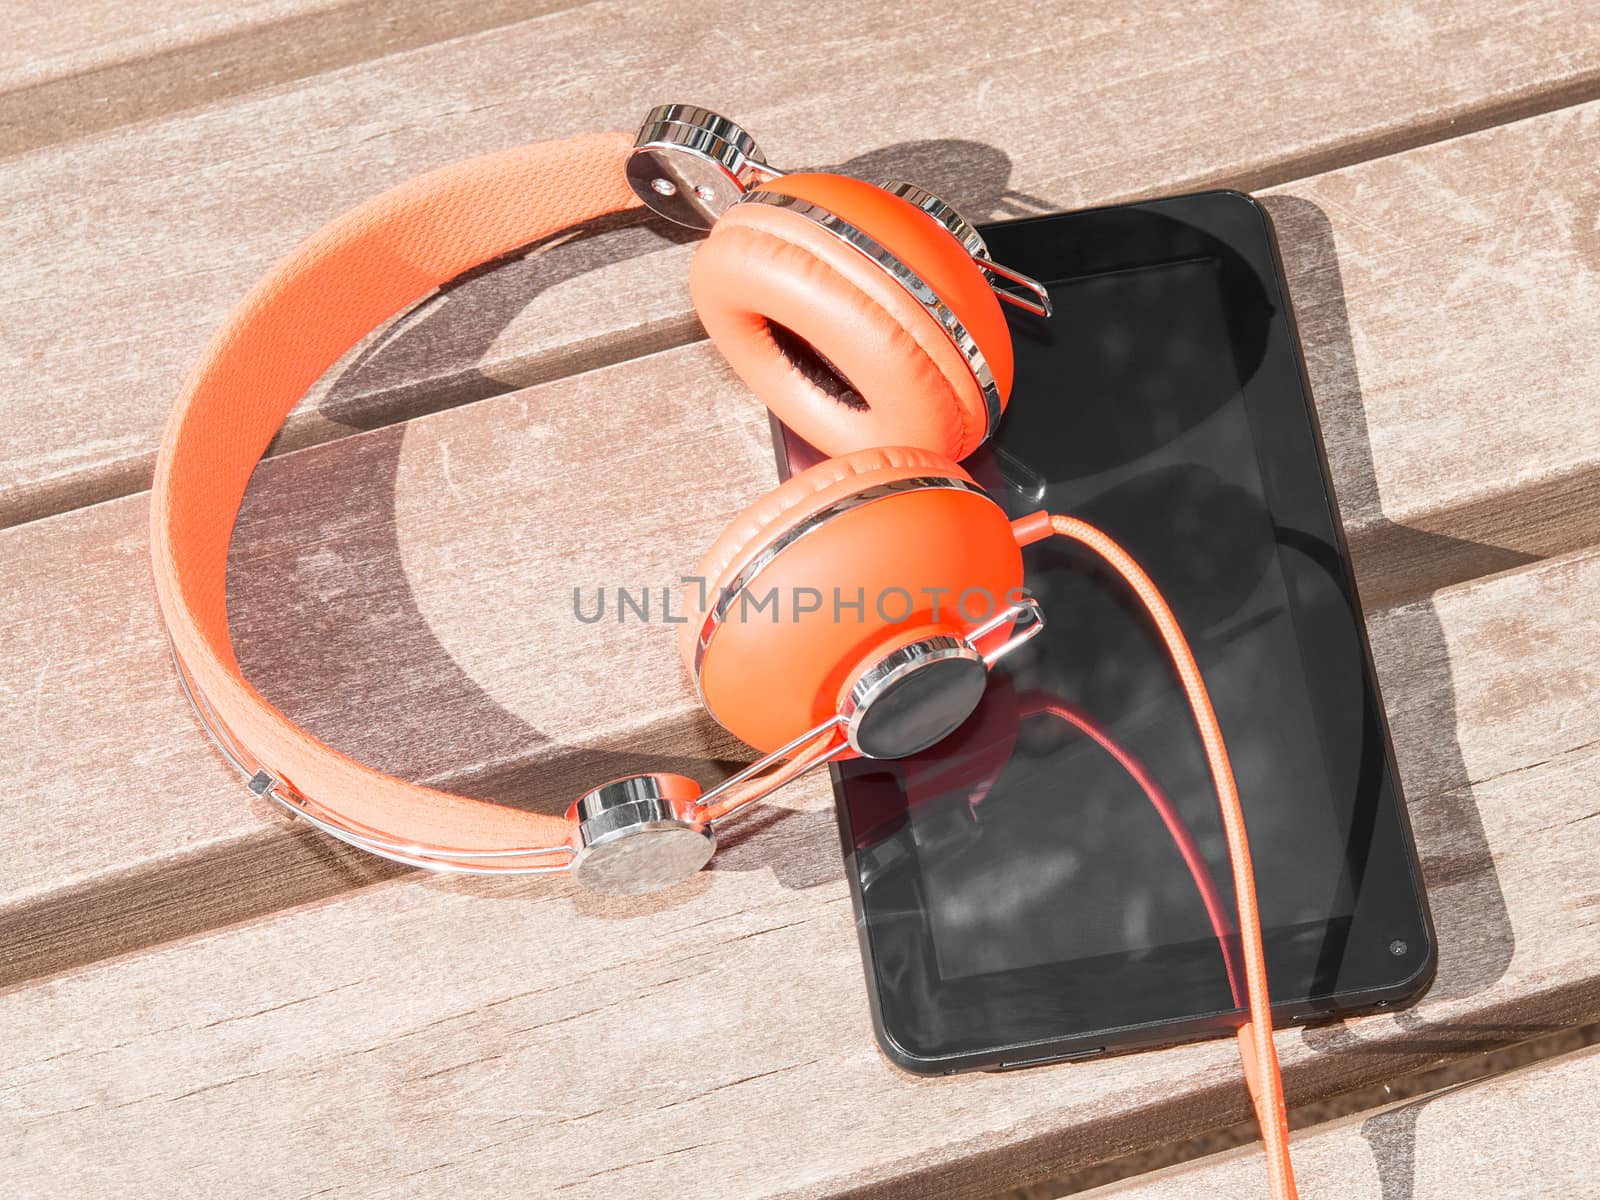 Vibrant orange headphones and black tablet pc on wooden bench for mobile language learning or distance education